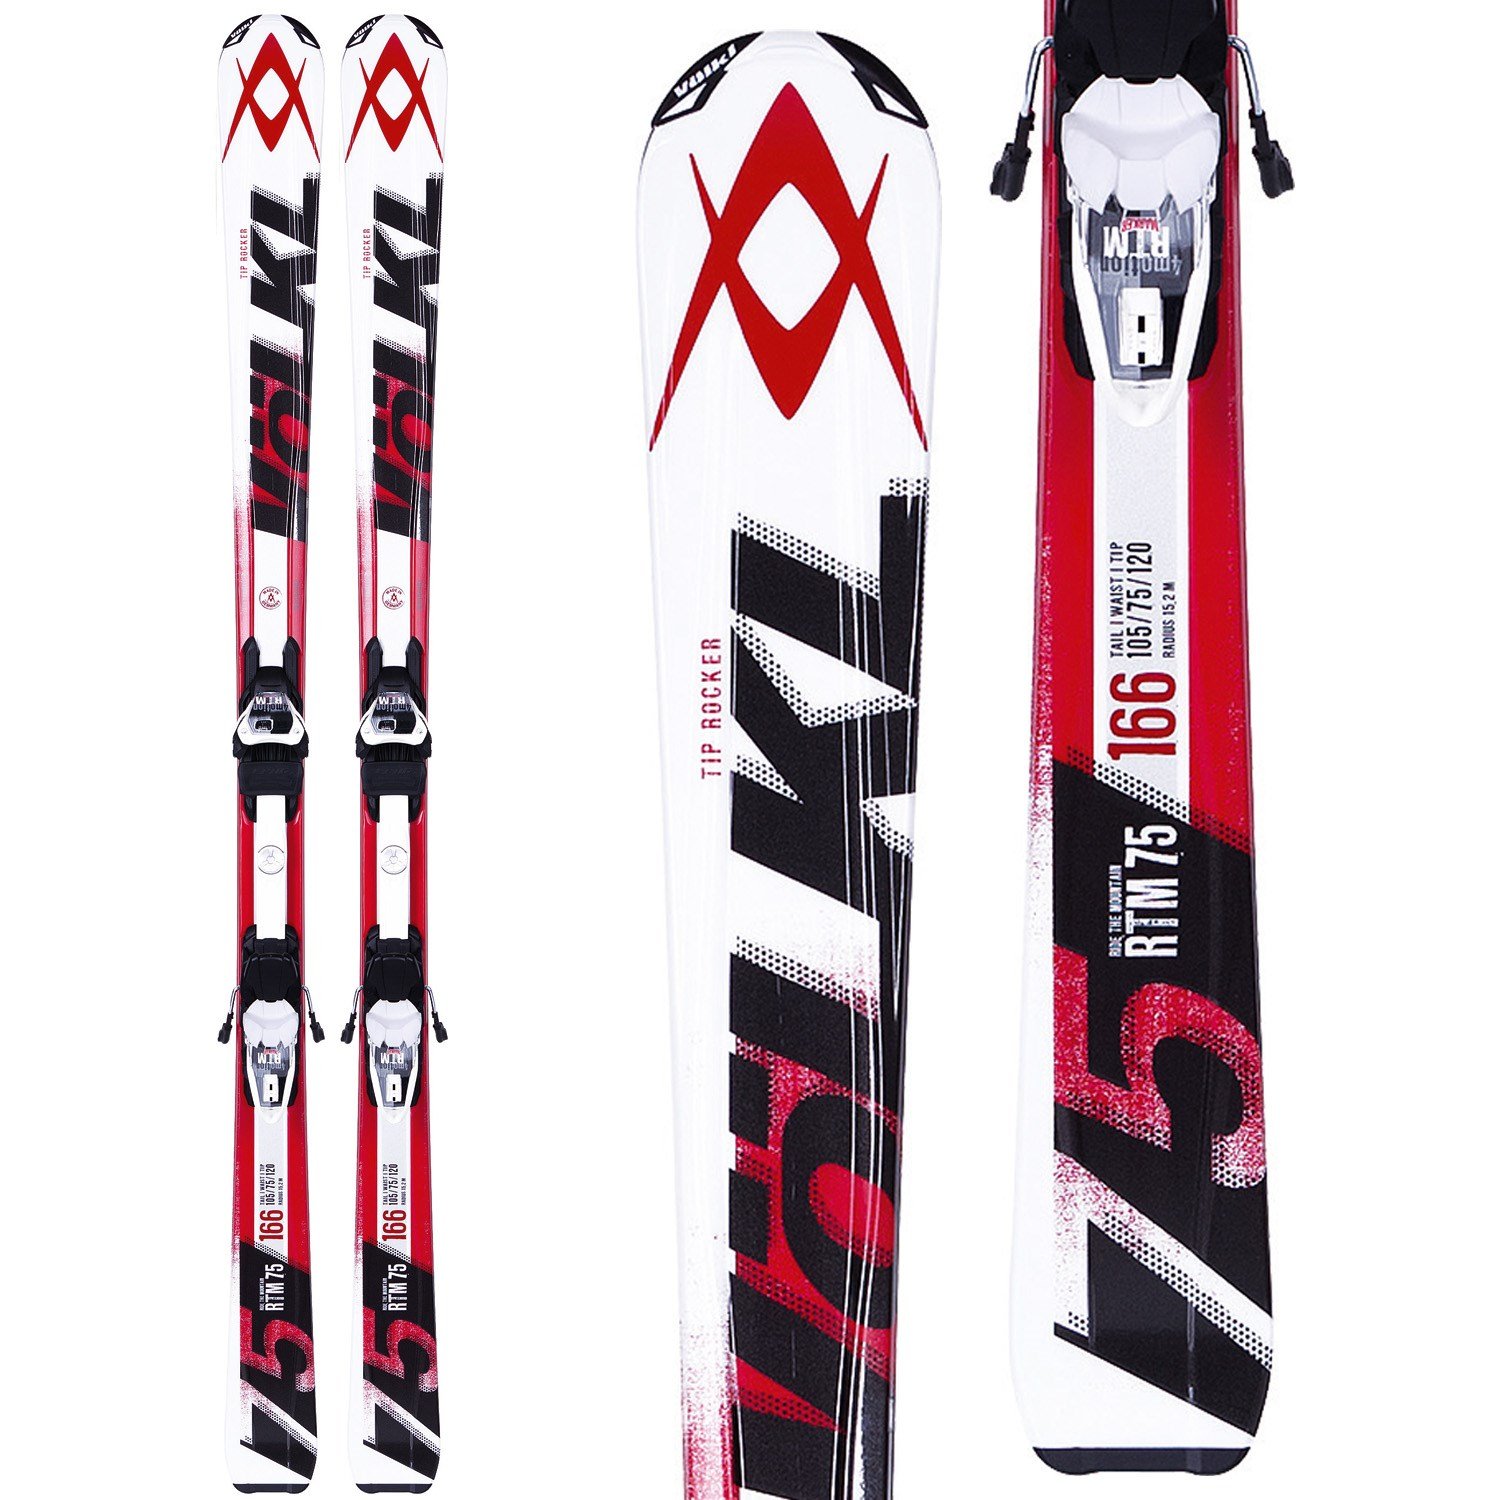 Details about   Volkl RTM Jr Skis & Marker 4.5 Bindings Tuned Waxed  80,90,100,110 cm Kids Youth 